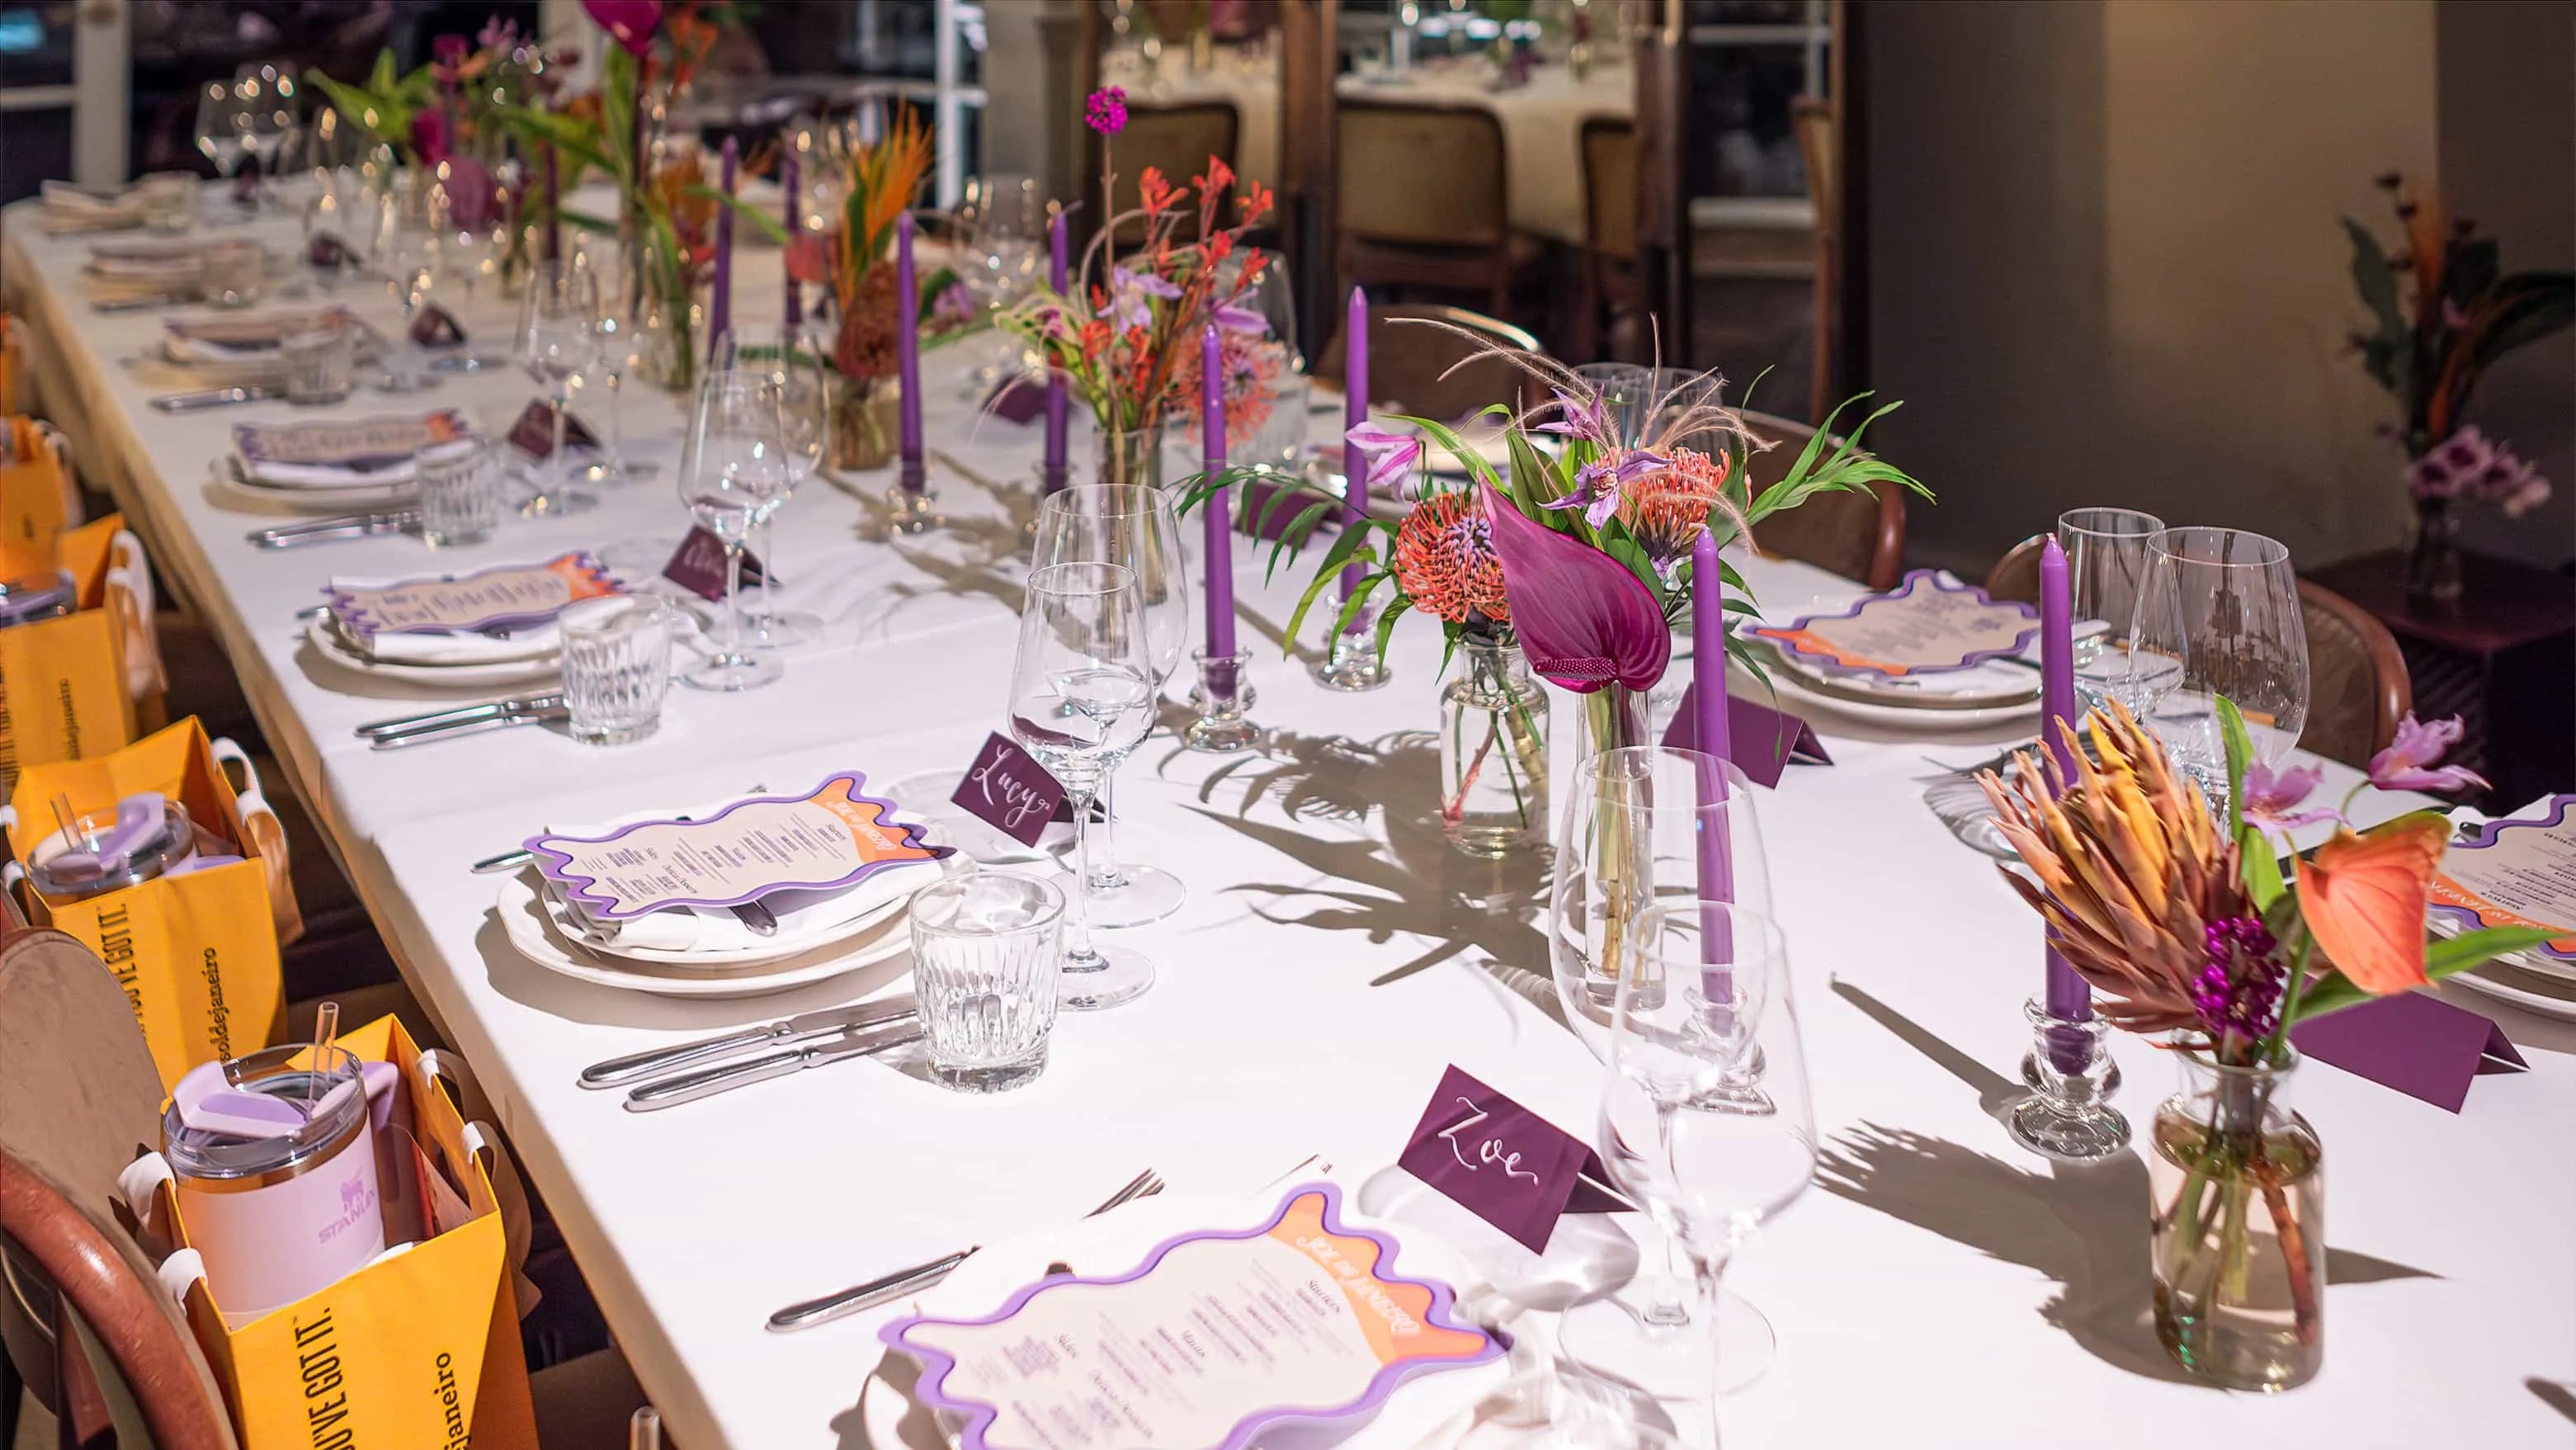 Elegantly set dining table at Maine Mayfair restaurant with Amaranté London's floral centerpieces, fine glassware, and personalized place settings for an exclusive Sol de Janeiro event.